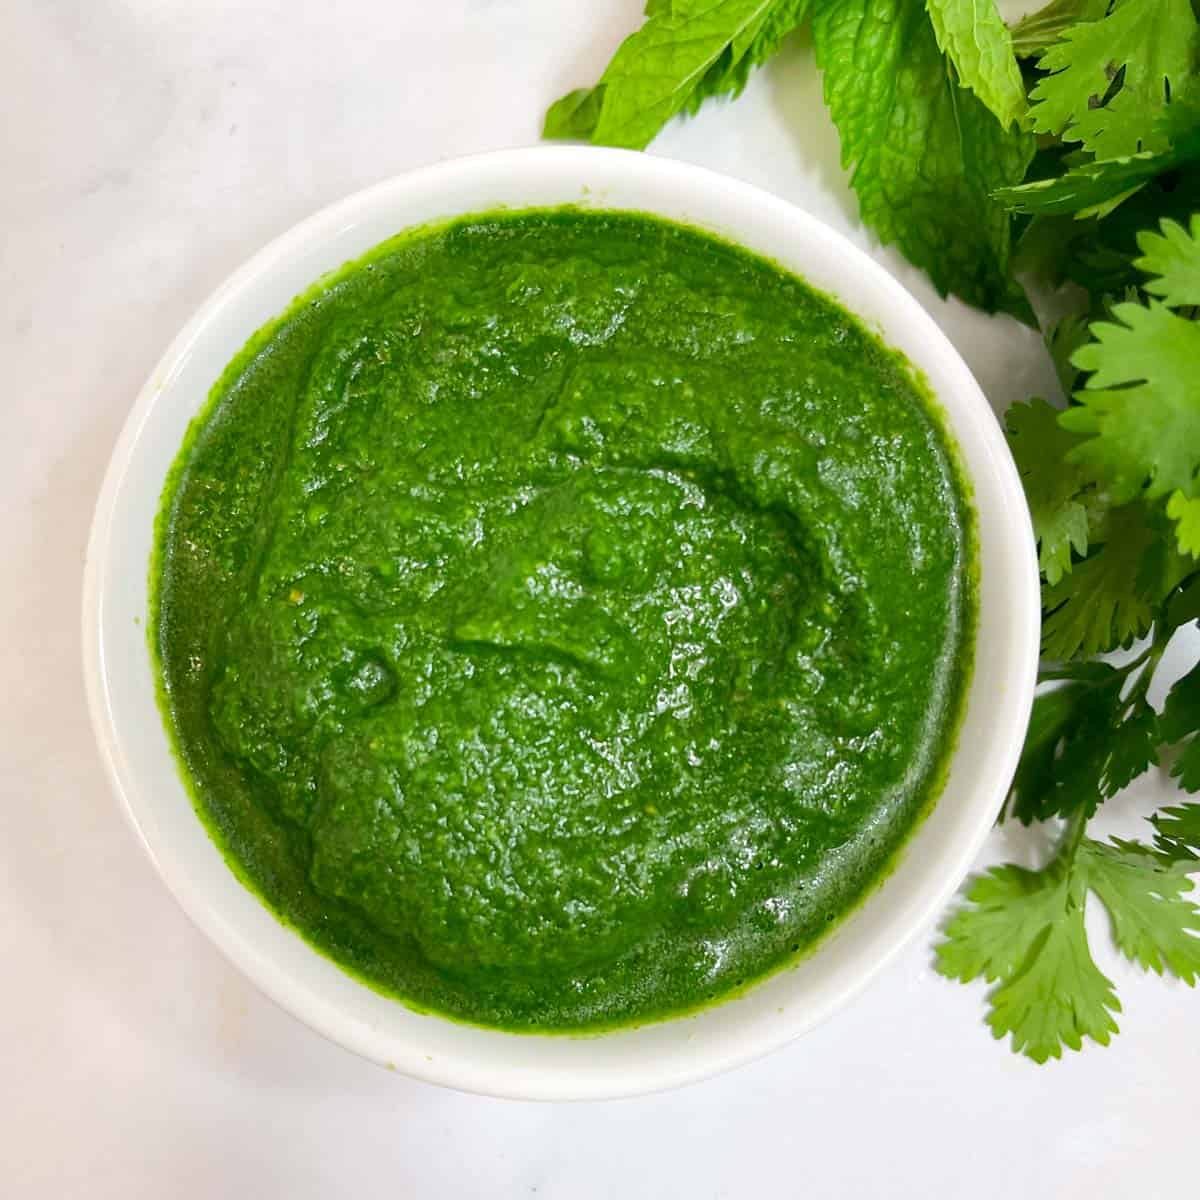 green chutney (coriander mint chutney) served in a bowl with mint and coriander leaves on the side